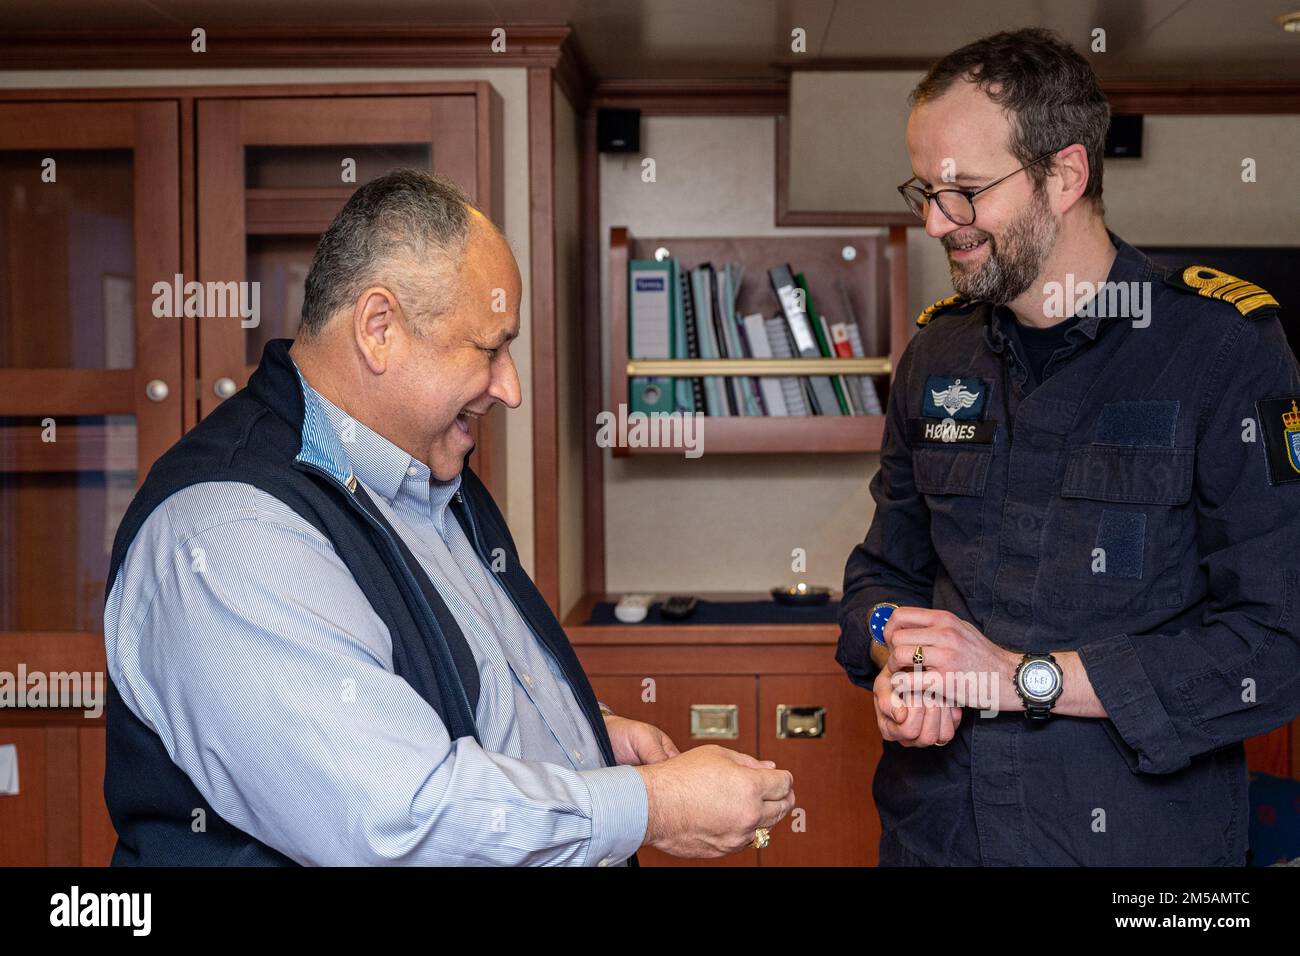 BERGEN, Norway (Feb. 16, 2022) — Secretary of the Navy Carlos Del Toro exchanges challenge coins with Norwegian Cmdr. Lars Ole Høknes, commanding officer of HNoMS Thor Heyerdahl (F314), aboard the ship in Bergen, Norway, Feb. 16, 2022. Secretary Del Toro is in Norway to visit U.S. service members and Norwegian government leaders to reinforce existing bilateral and multilateral security relationships between the U.S. Navy and the Royal Norwegian Navy. Stock Photo